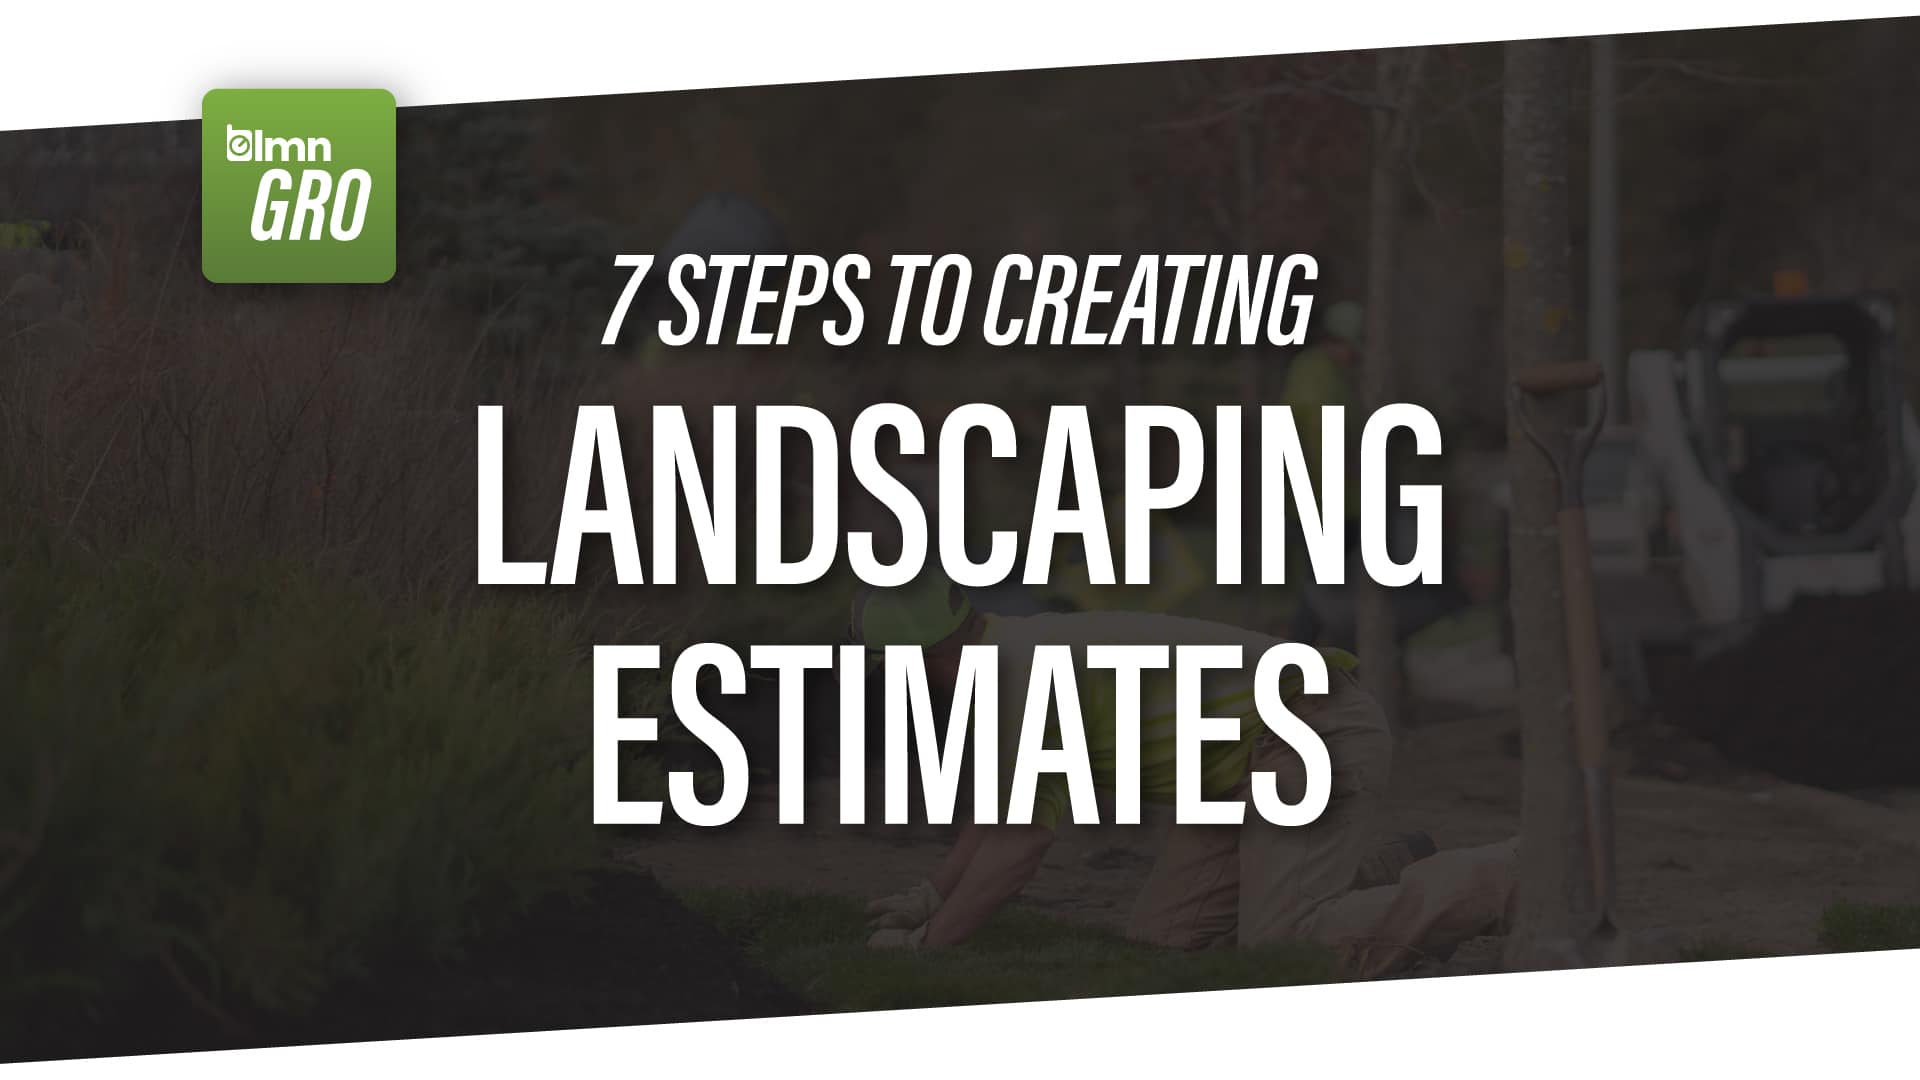 How to create landscaping estimates